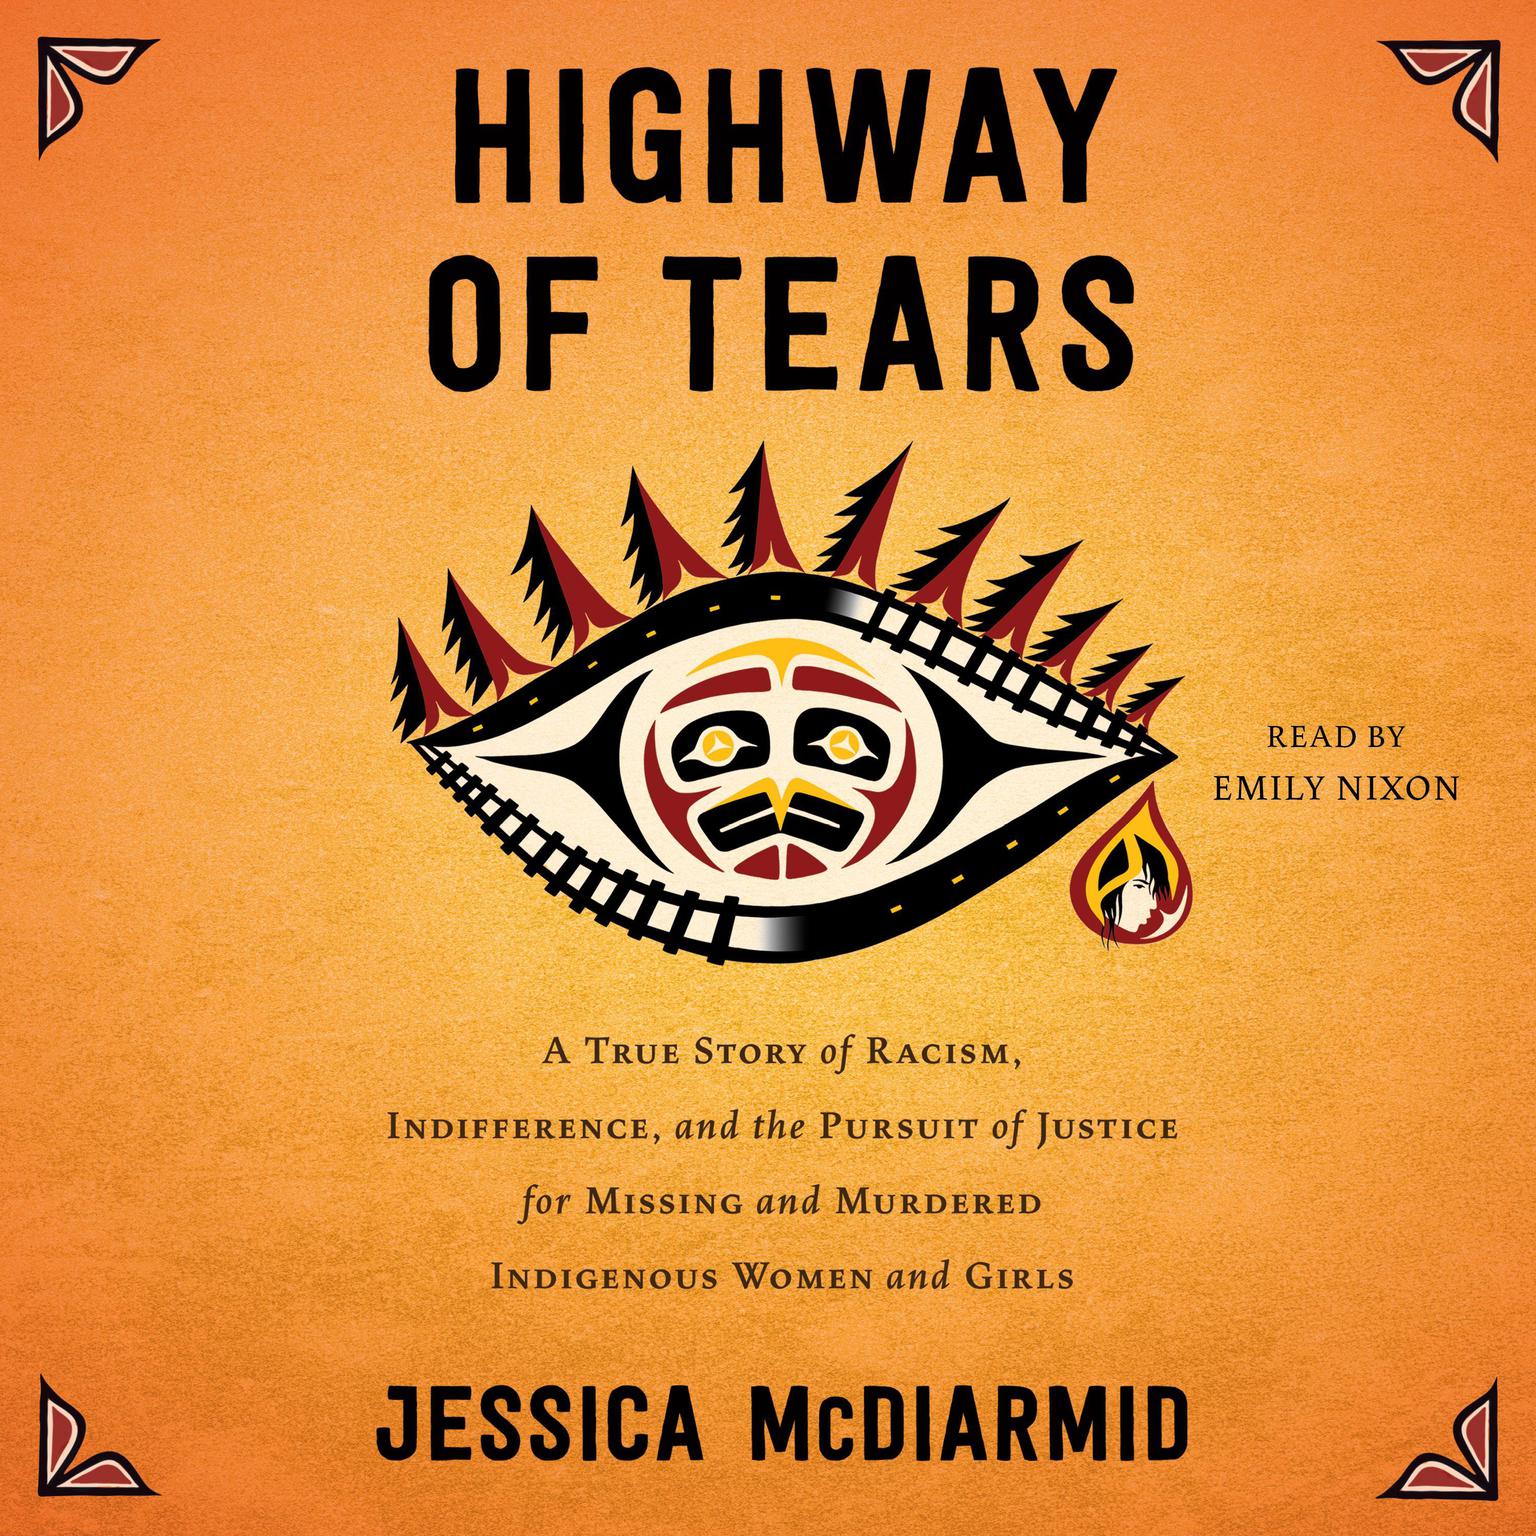 Highway of Tears: A True Story of Racism, Indifference, and the Pursuit of Justice for Missing and Murdered Indigenous Women and Girls Audiobook, by Jessica McDiarmid